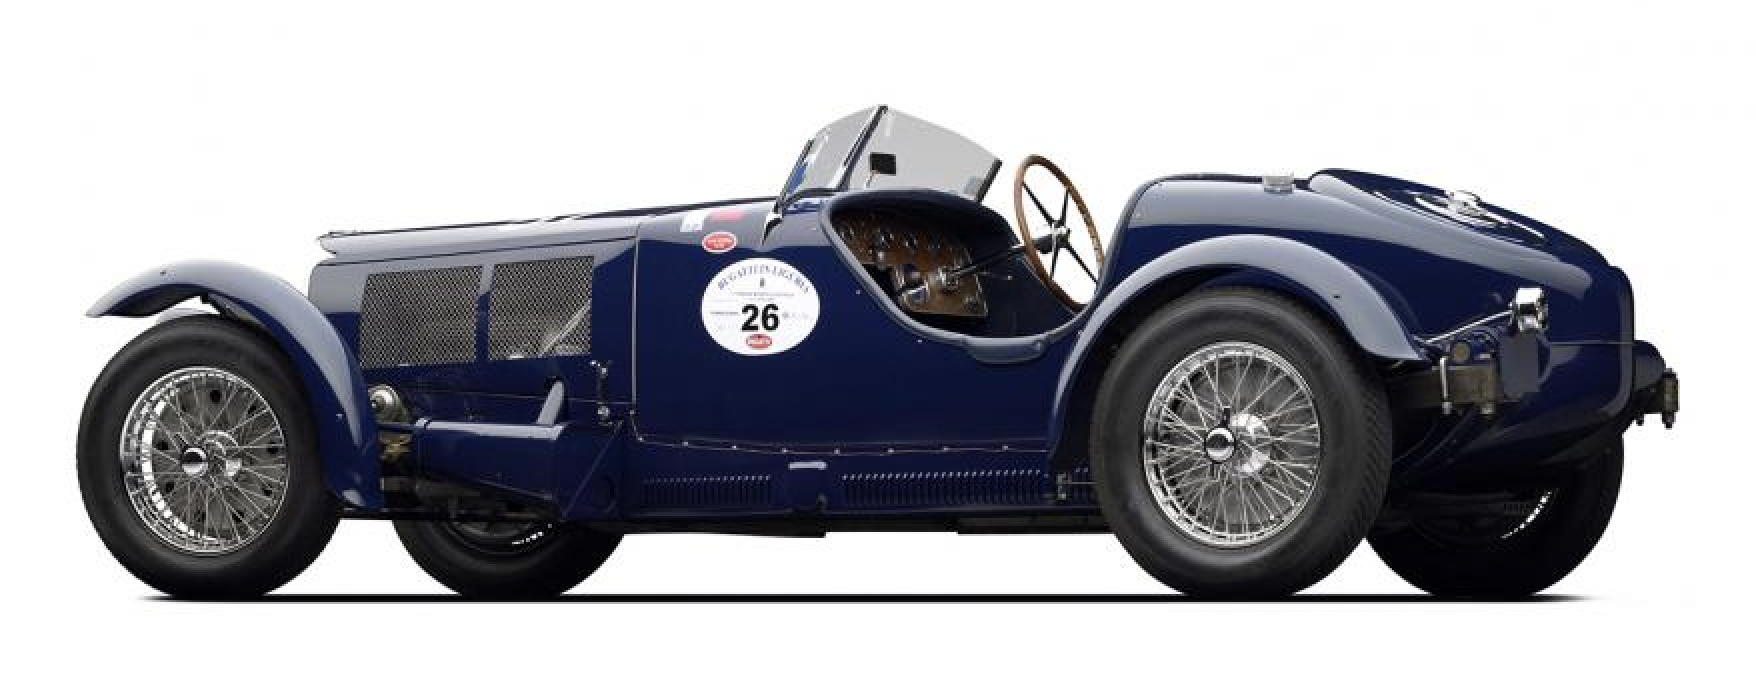  1936 Bugatti Type 57SC Competition Roadster. Image courtesy of the Mullin Automotive Museum